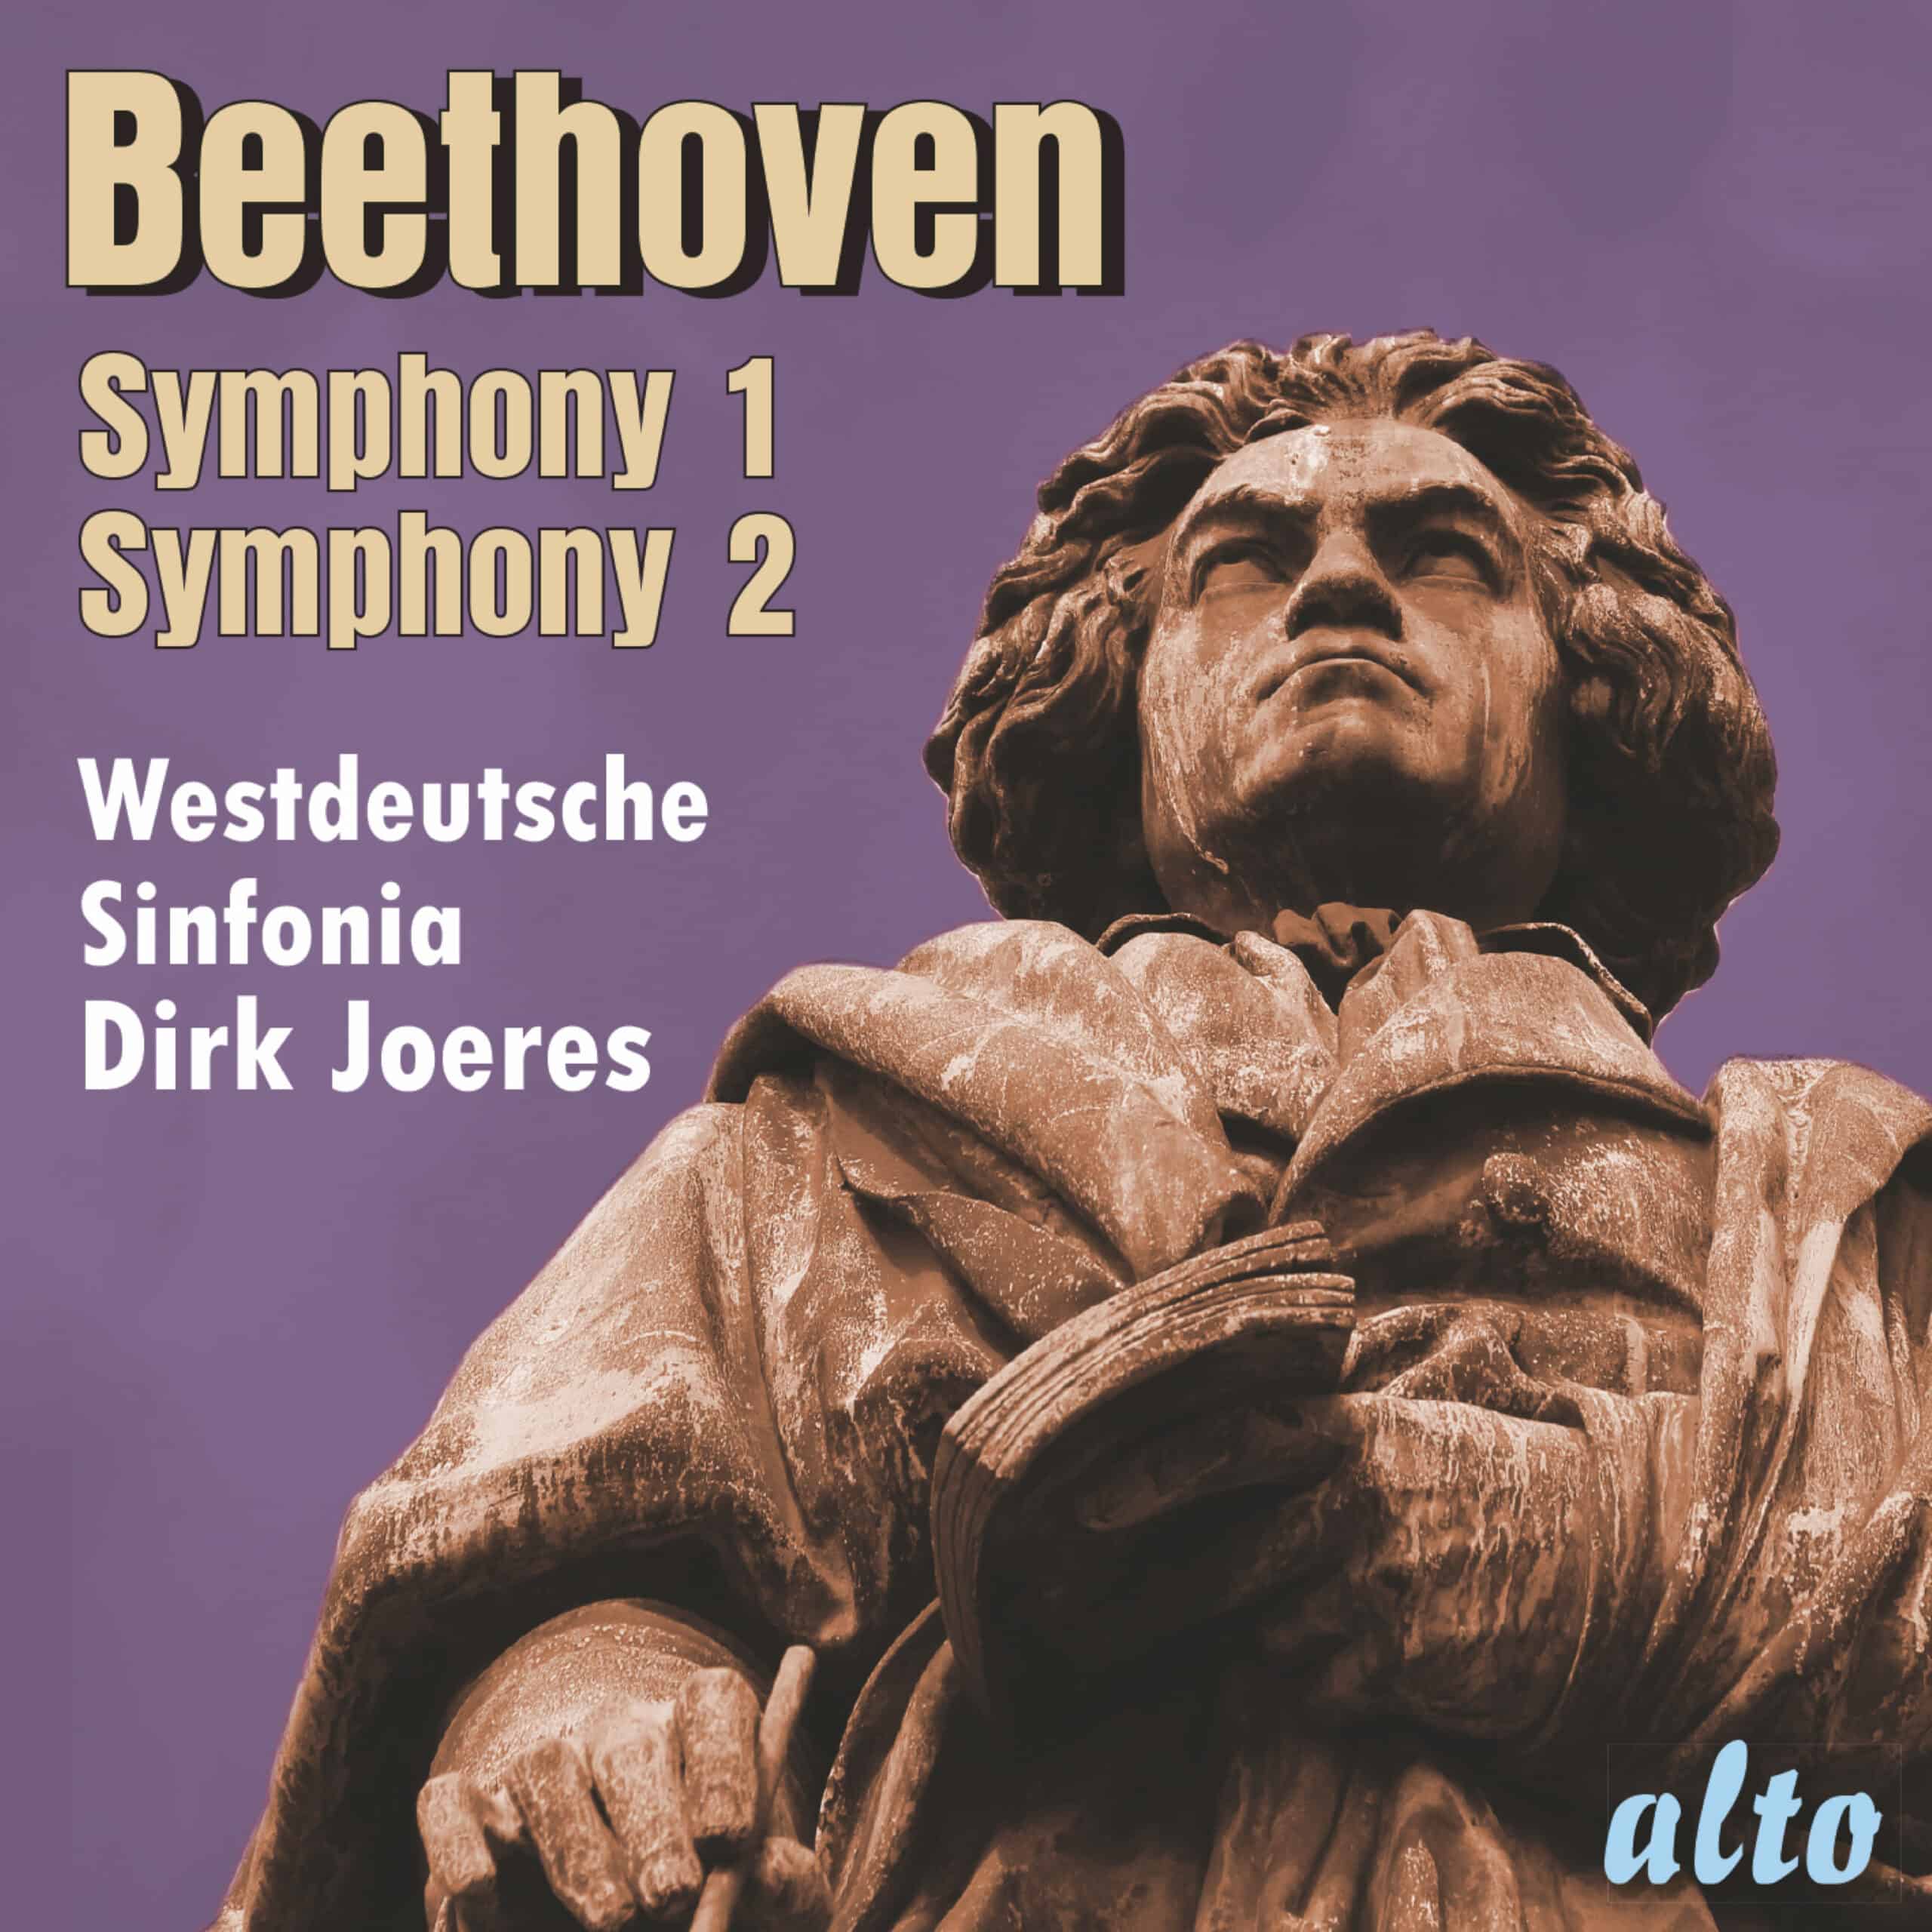 Beethoven Symphonies Nos 1 And 2 Listen Now